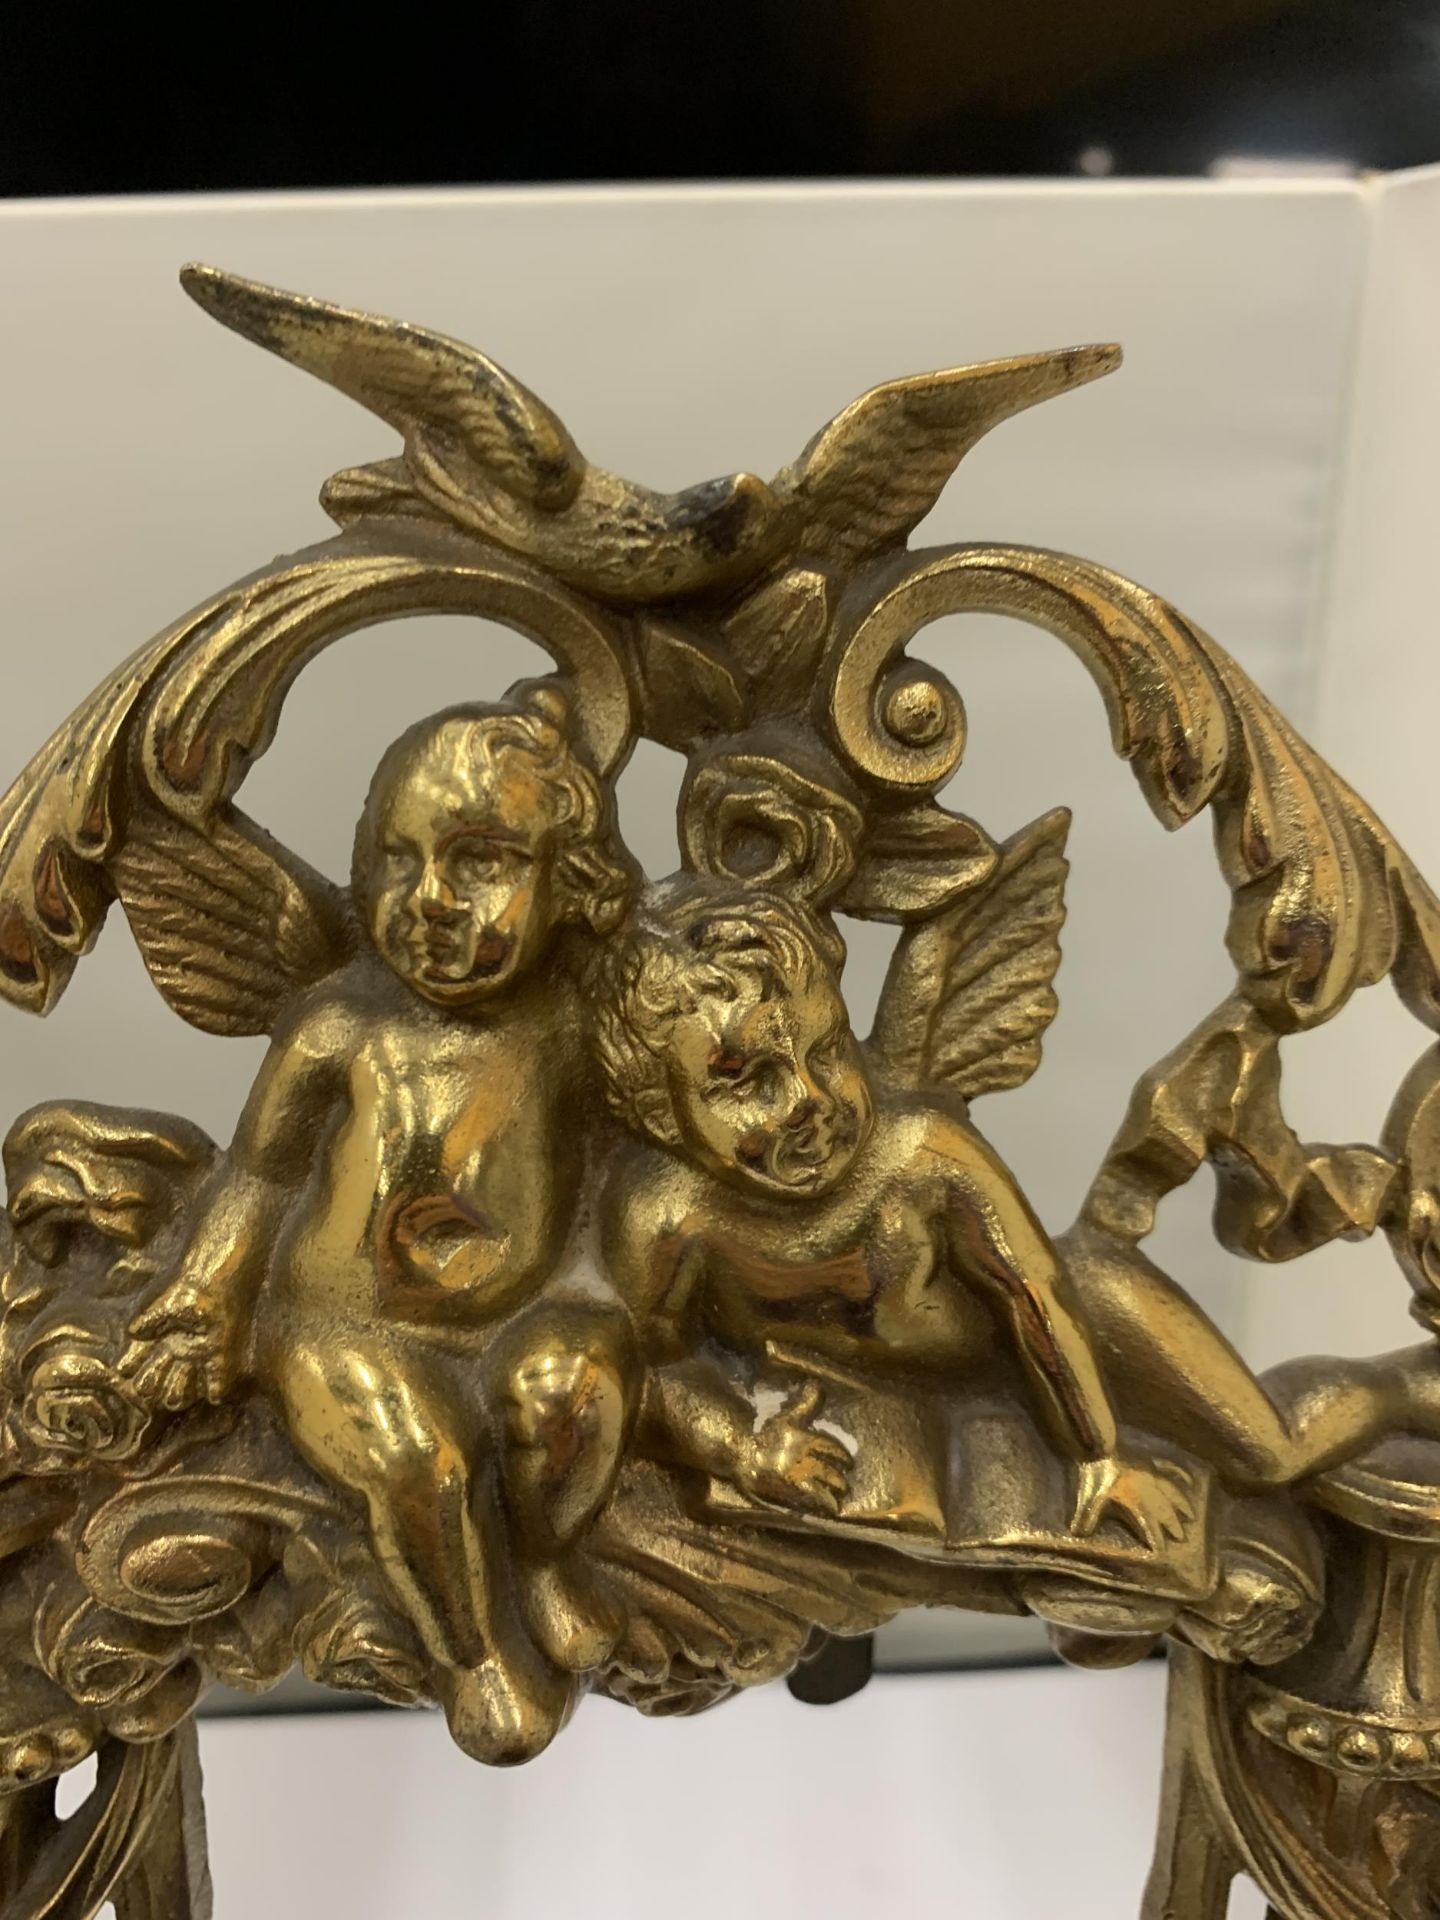 A DECORATIVE HEAVY BRASS FRAME WITH CHERUBS - Image 2 of 5